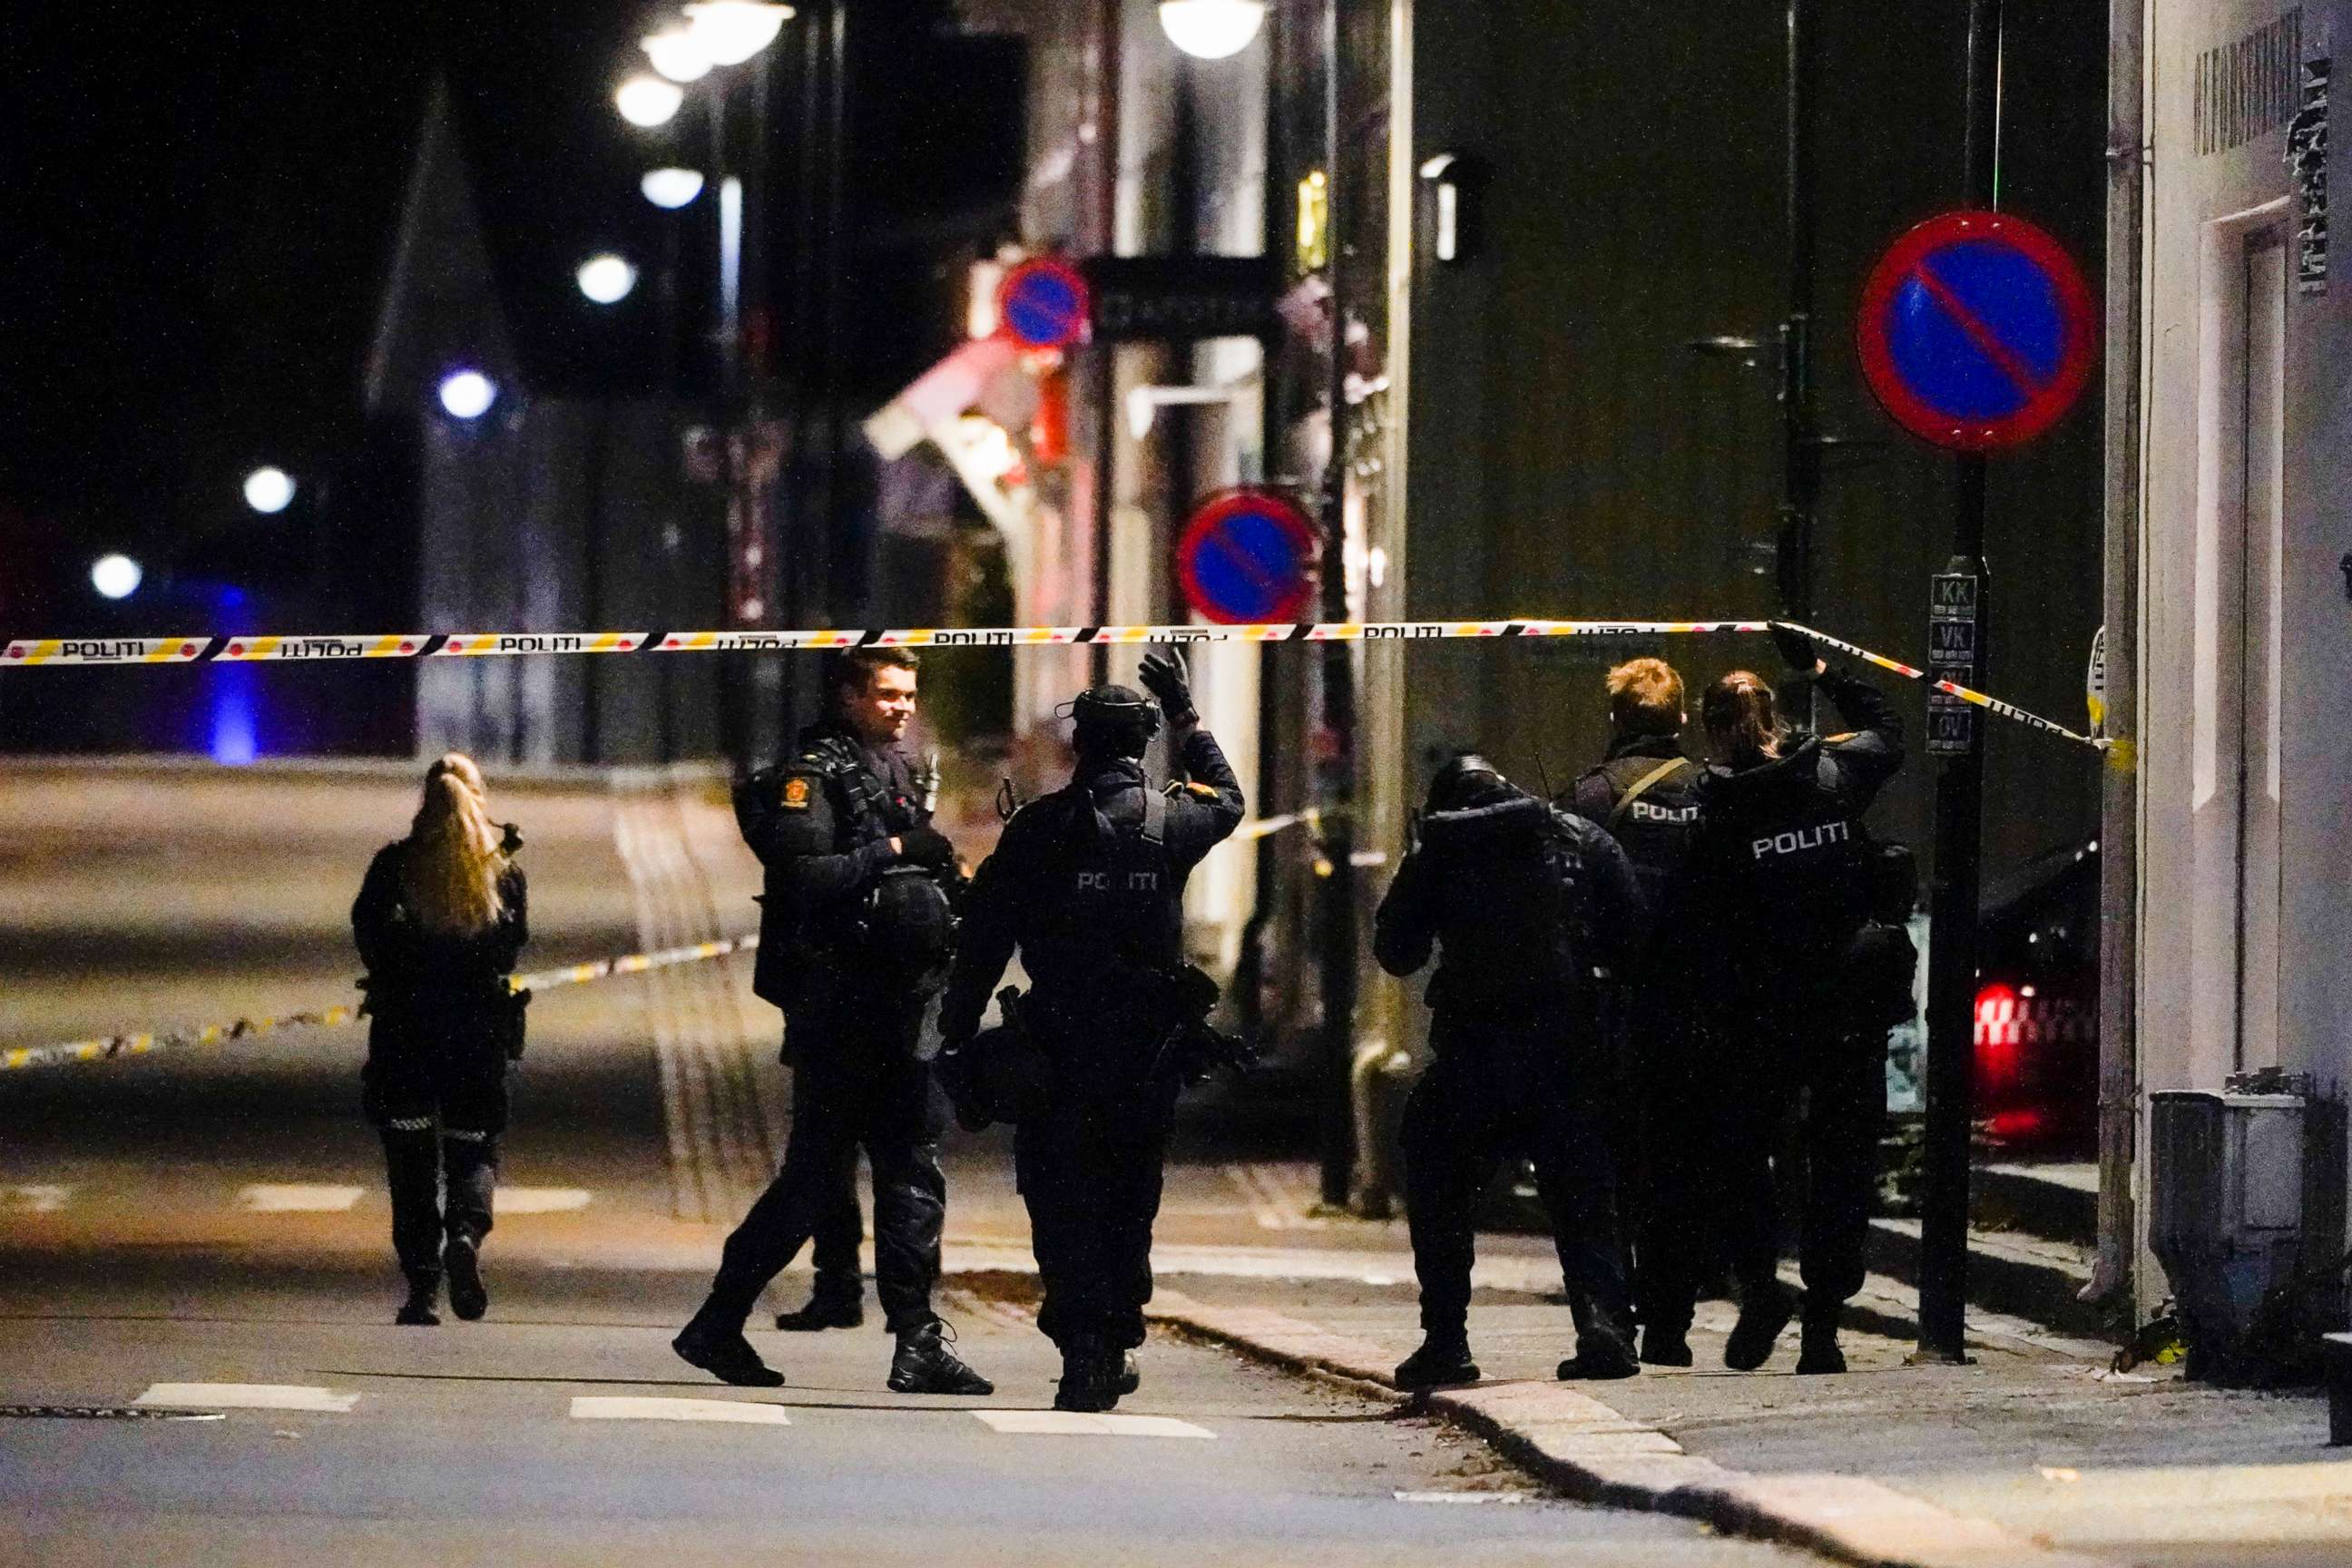 PHOTO: Police stand at the scene after an attack in Kongsberg, Norway, Wednesday, Oct. 13, 2021. Several people have been killed and others injured by a man armed with a bow and arrow in a town west of the Norwegian capital, Oslo.